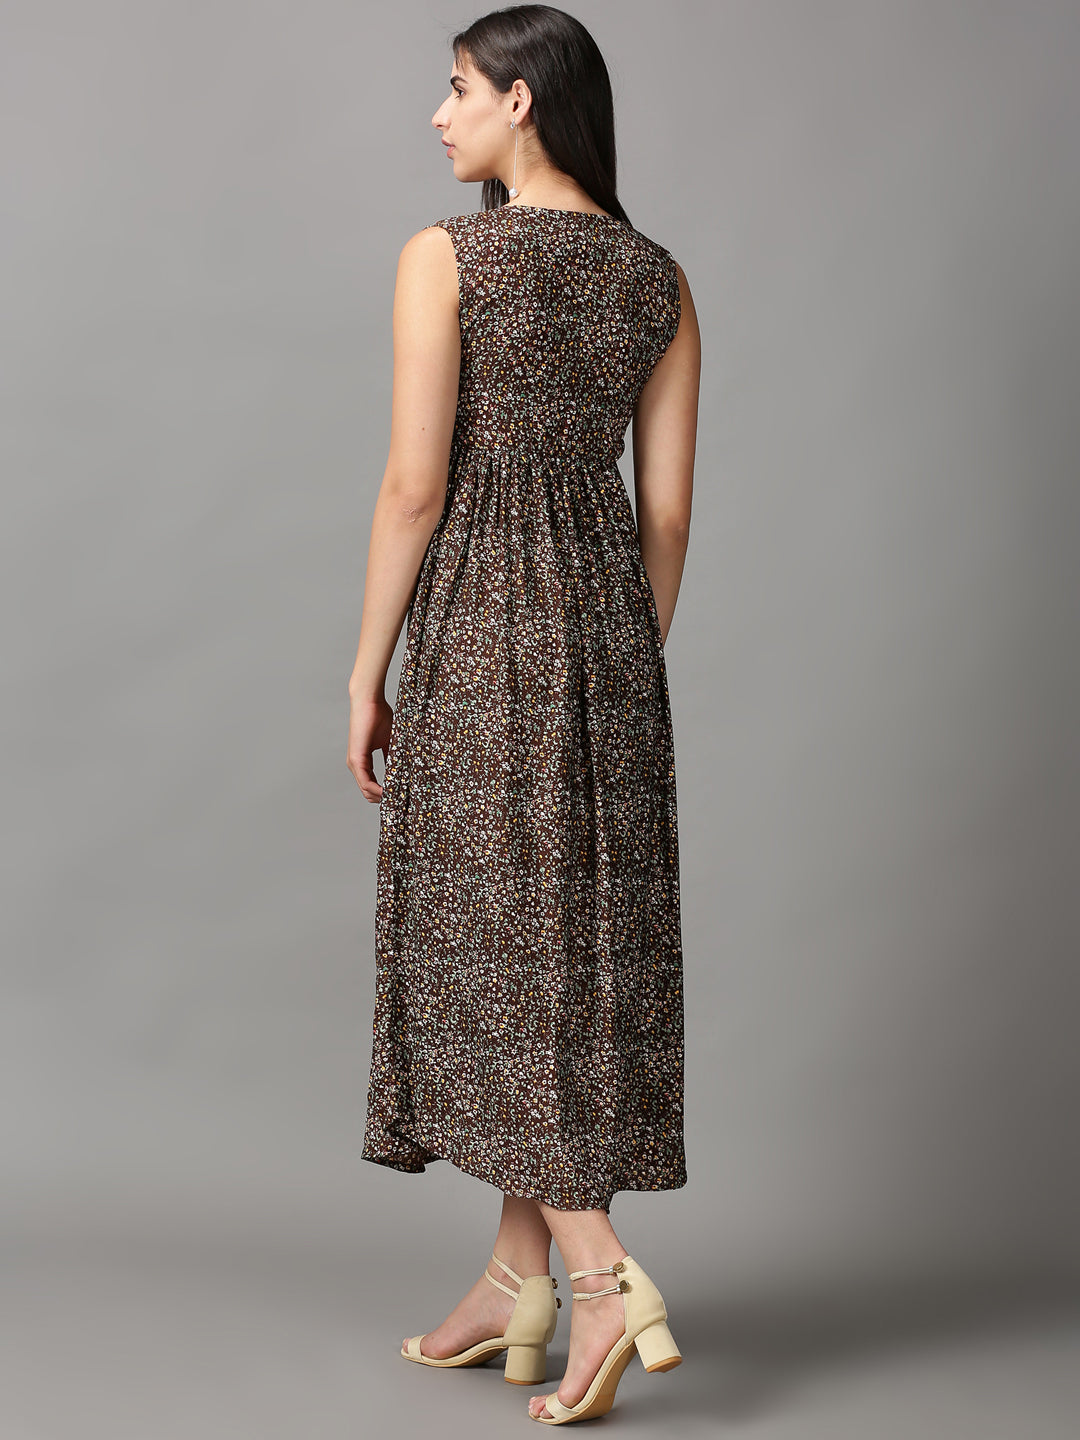 Women's Brown Floral Fit and Flare Dress